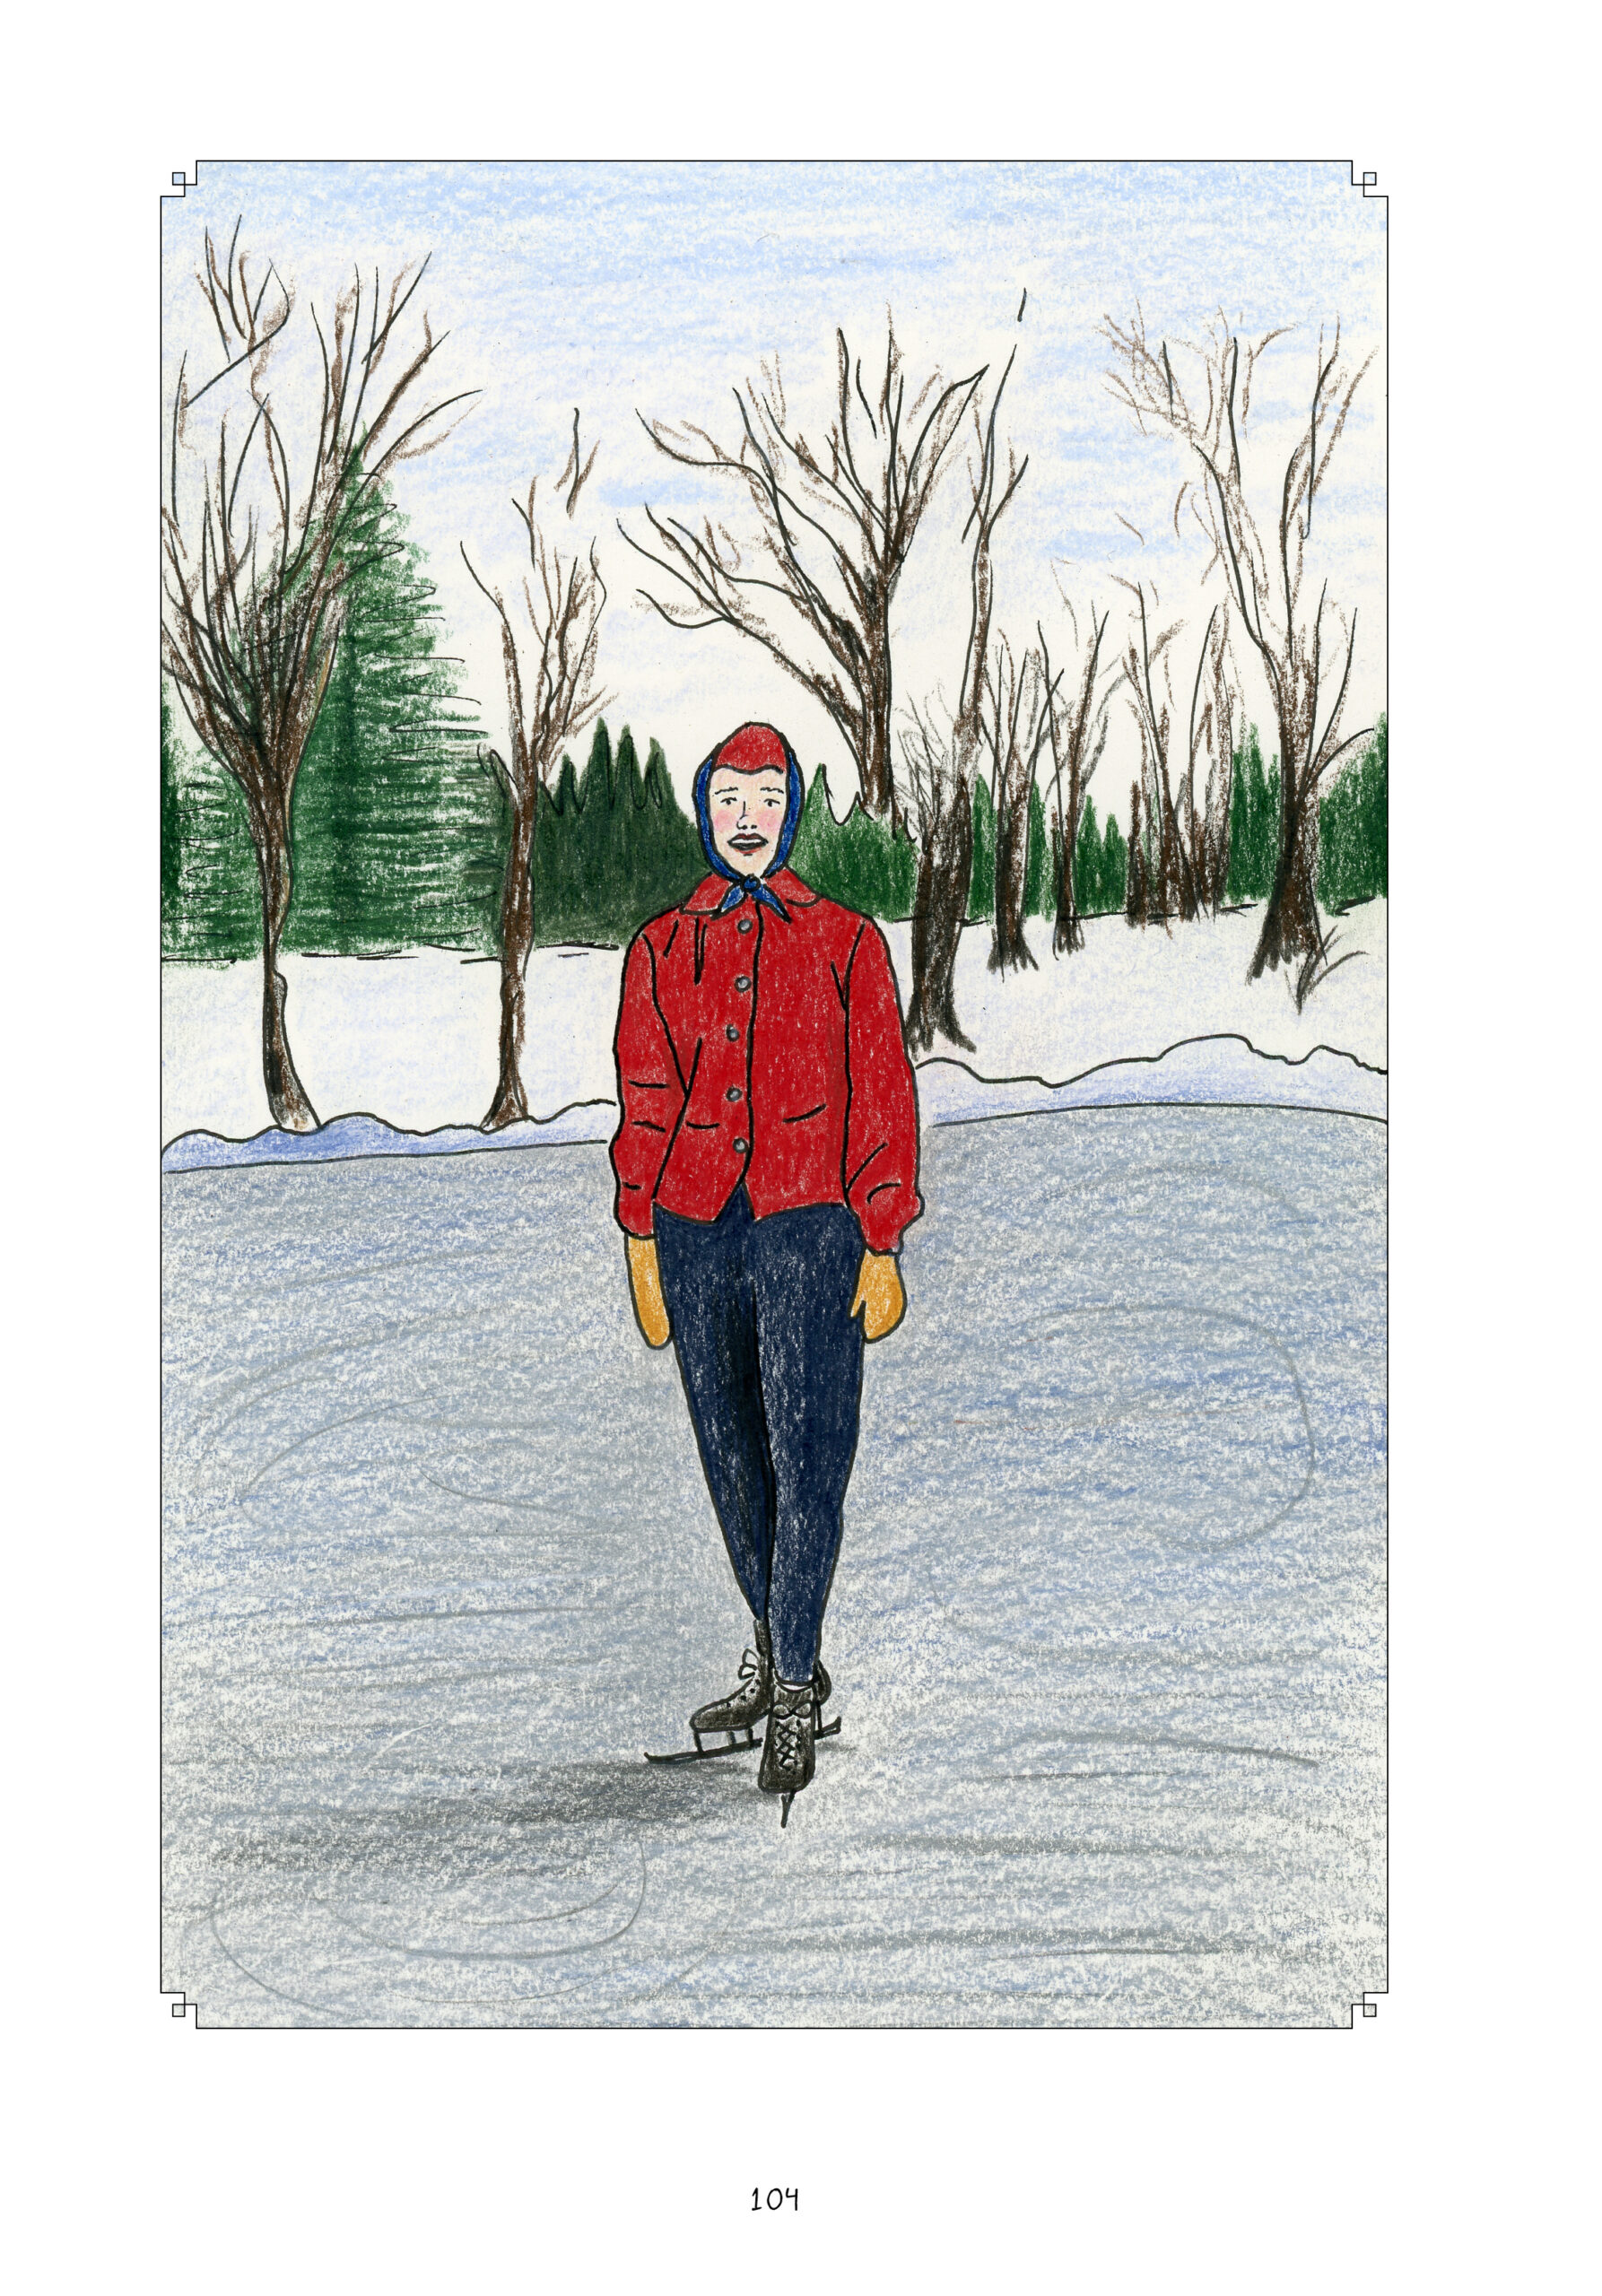 A young Lorraine stands on a frozen pond with ice skates. She is bundled up in a red jacket, blue pants, yellow gloves, and a red hat, with a blue bandana wrapped around her head and tied in a bow under her chin. Her cheeks are flushed and she is smiling. There are leafless trees standing in a blanket of snow behind her, with evergreens farther off in the background.